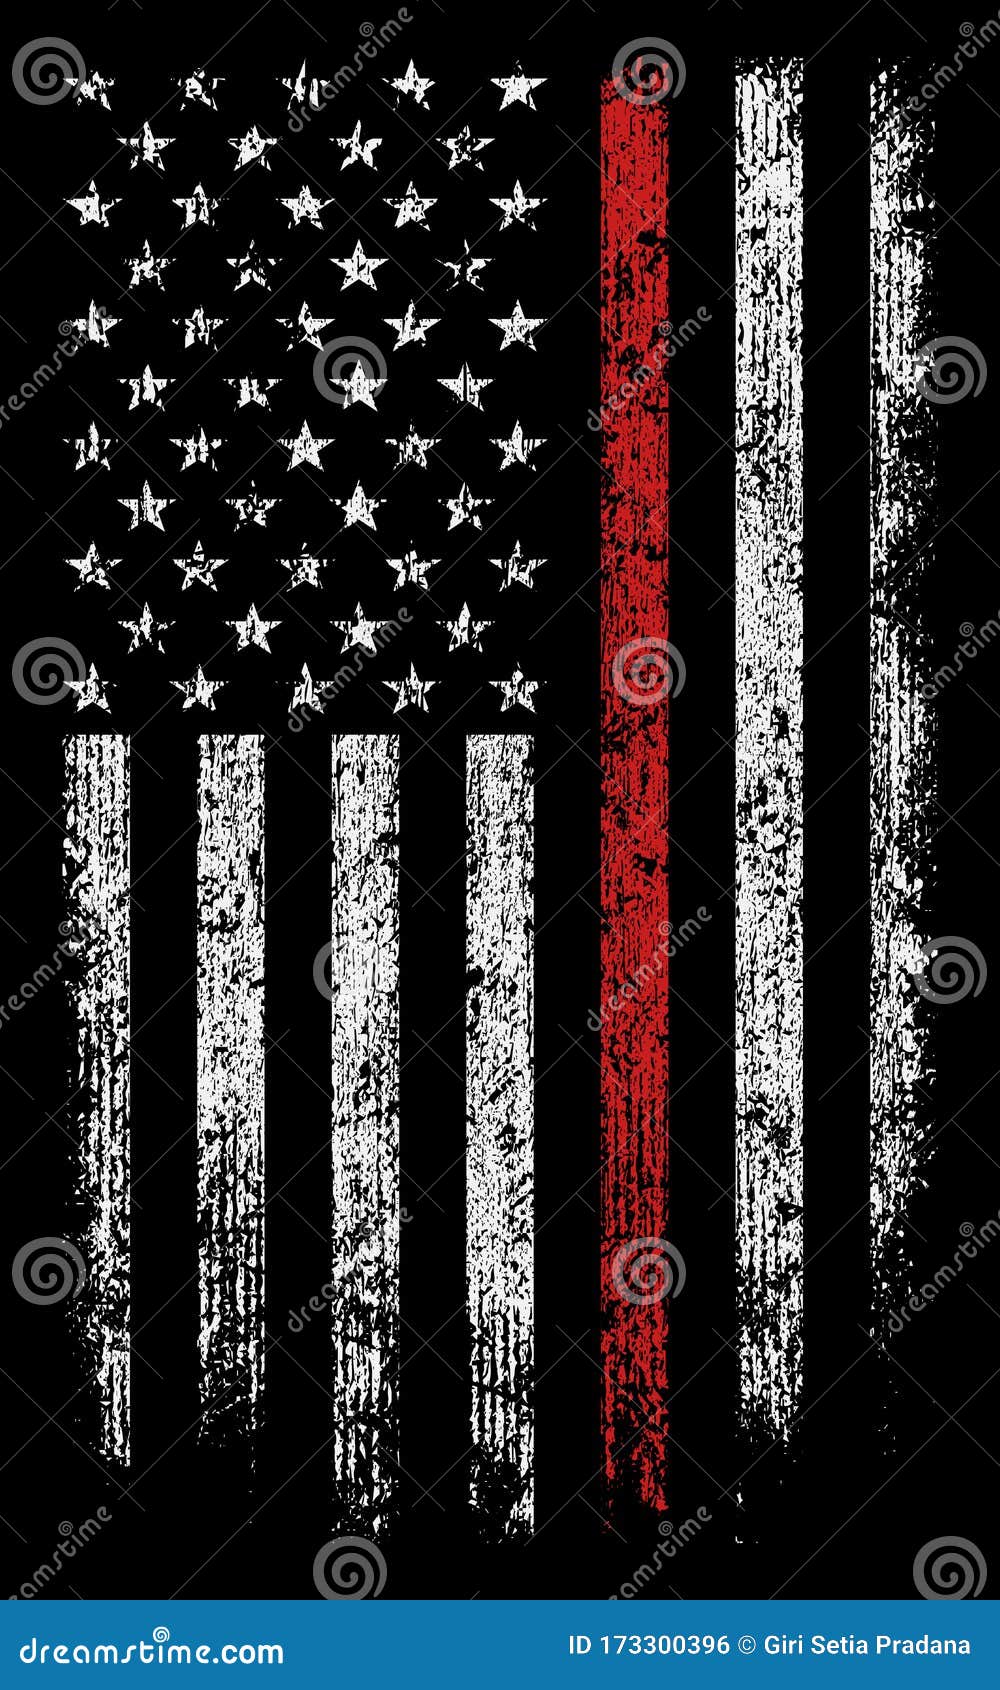 JMM Industries Firefighter Flag WAxe  Emblem Thin Red Line Ax Tattered  Look Car Window Bumper 5Inches by 3Inches UV Resistant Laminate PDS028   Amazonin Car  Motorbike